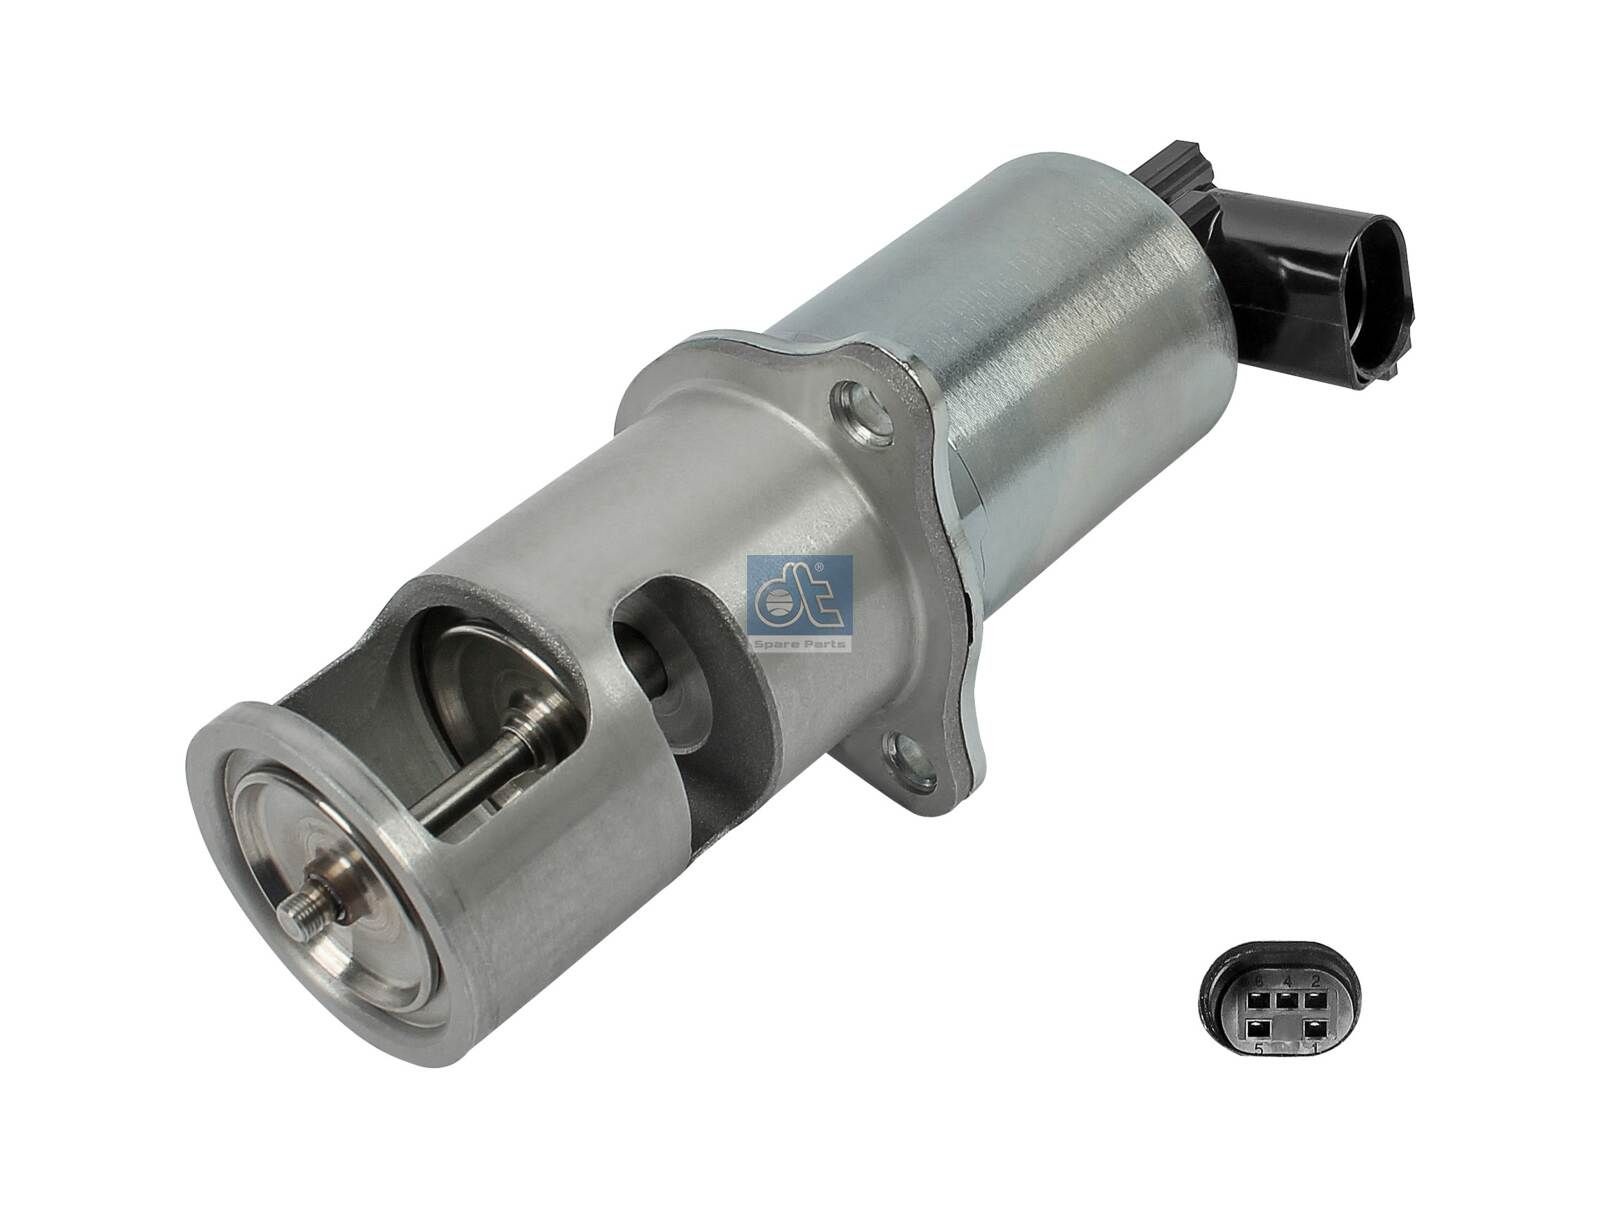 Nissan Valve DT Spare Parts 6.23176 at a good price